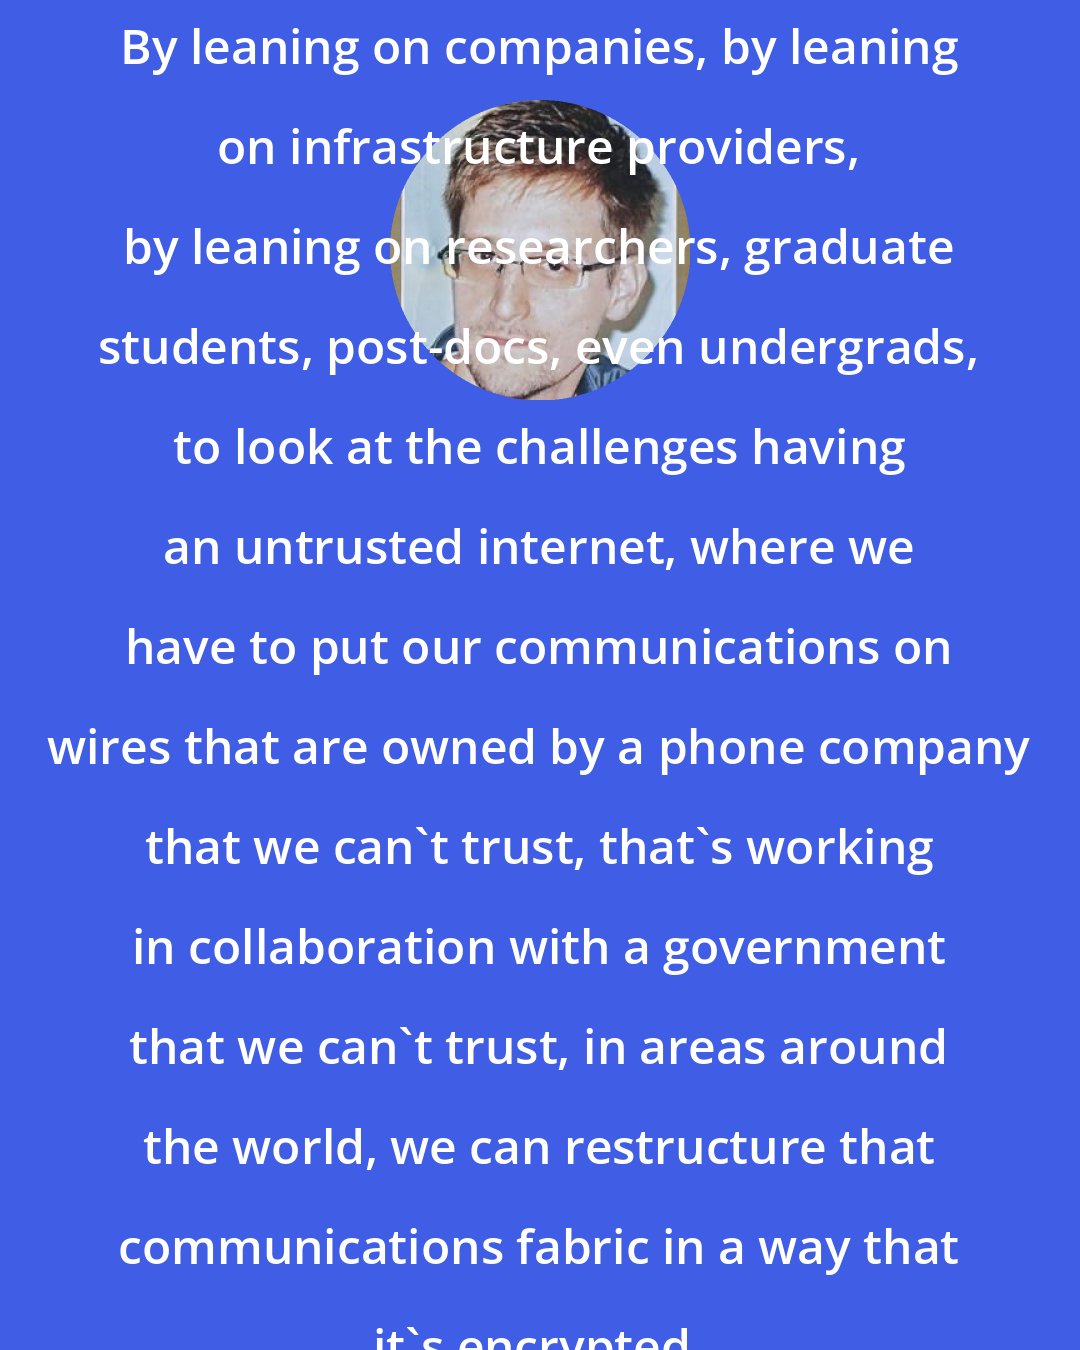 Edward Snowden: By leaning on companies, by leaning on infrastructure providers, by leaning on researchers, graduate students, post-docs, even undergrads, to look at the challenges having an untrusted internet, where we have to put our communications on wires that are owned by a phone company that we can't trust, that's working in collaboration with a government that we can't trust, in areas around the world, we can restructure that communications fabric in a way that it's encrypted.